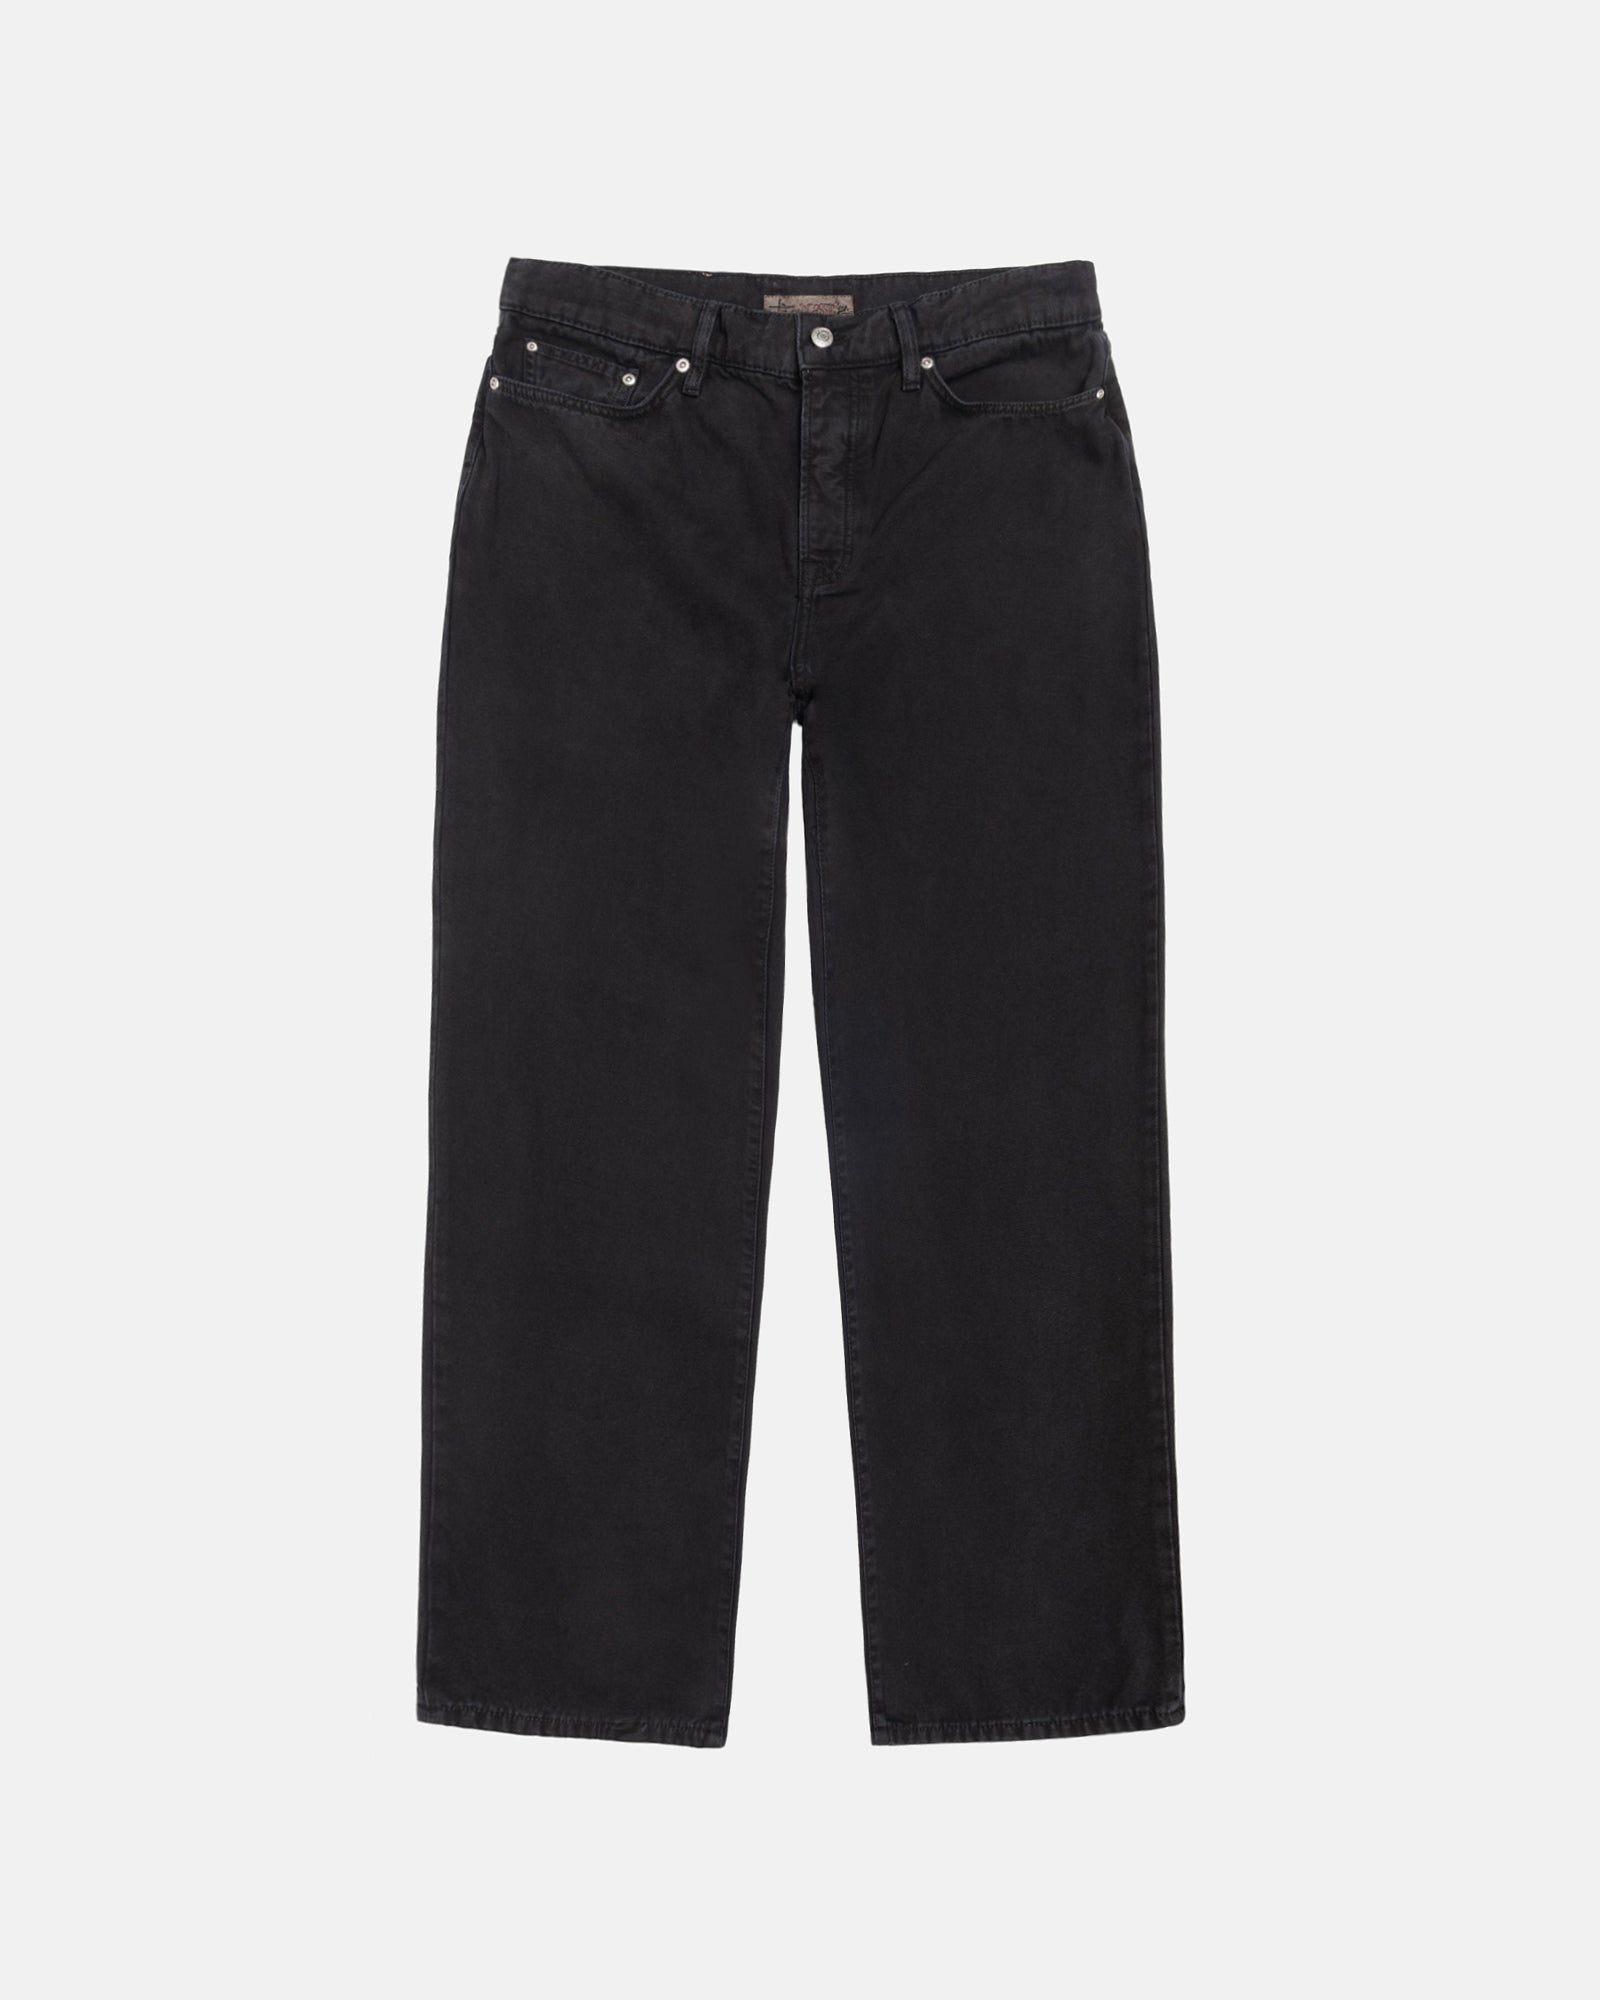 STÜSSY CLASSIC JEAN WASHED CANVAS Washed Black